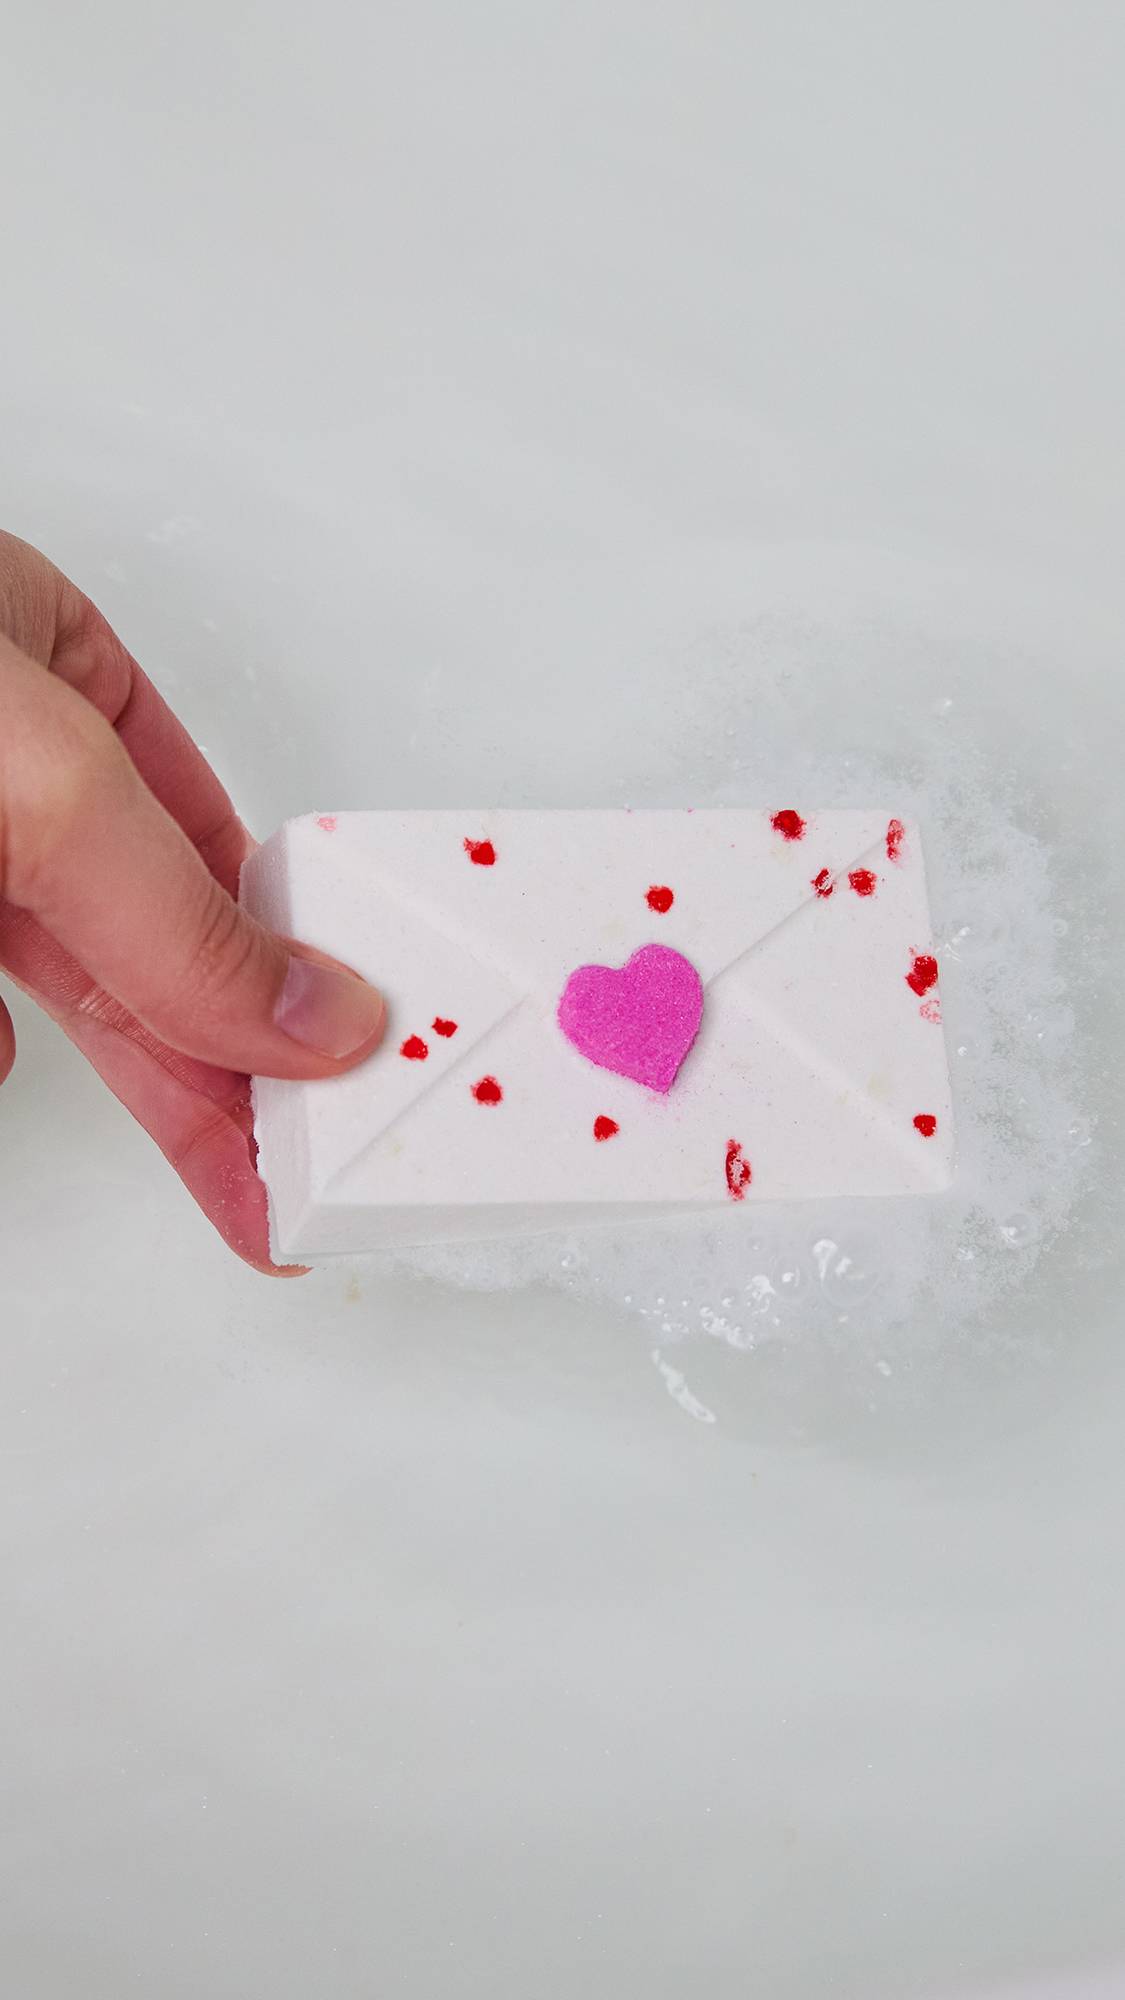 The image is a close-up of the model's fingertips holding the Love Letter bath bomb as they are about to drop it into the water. 